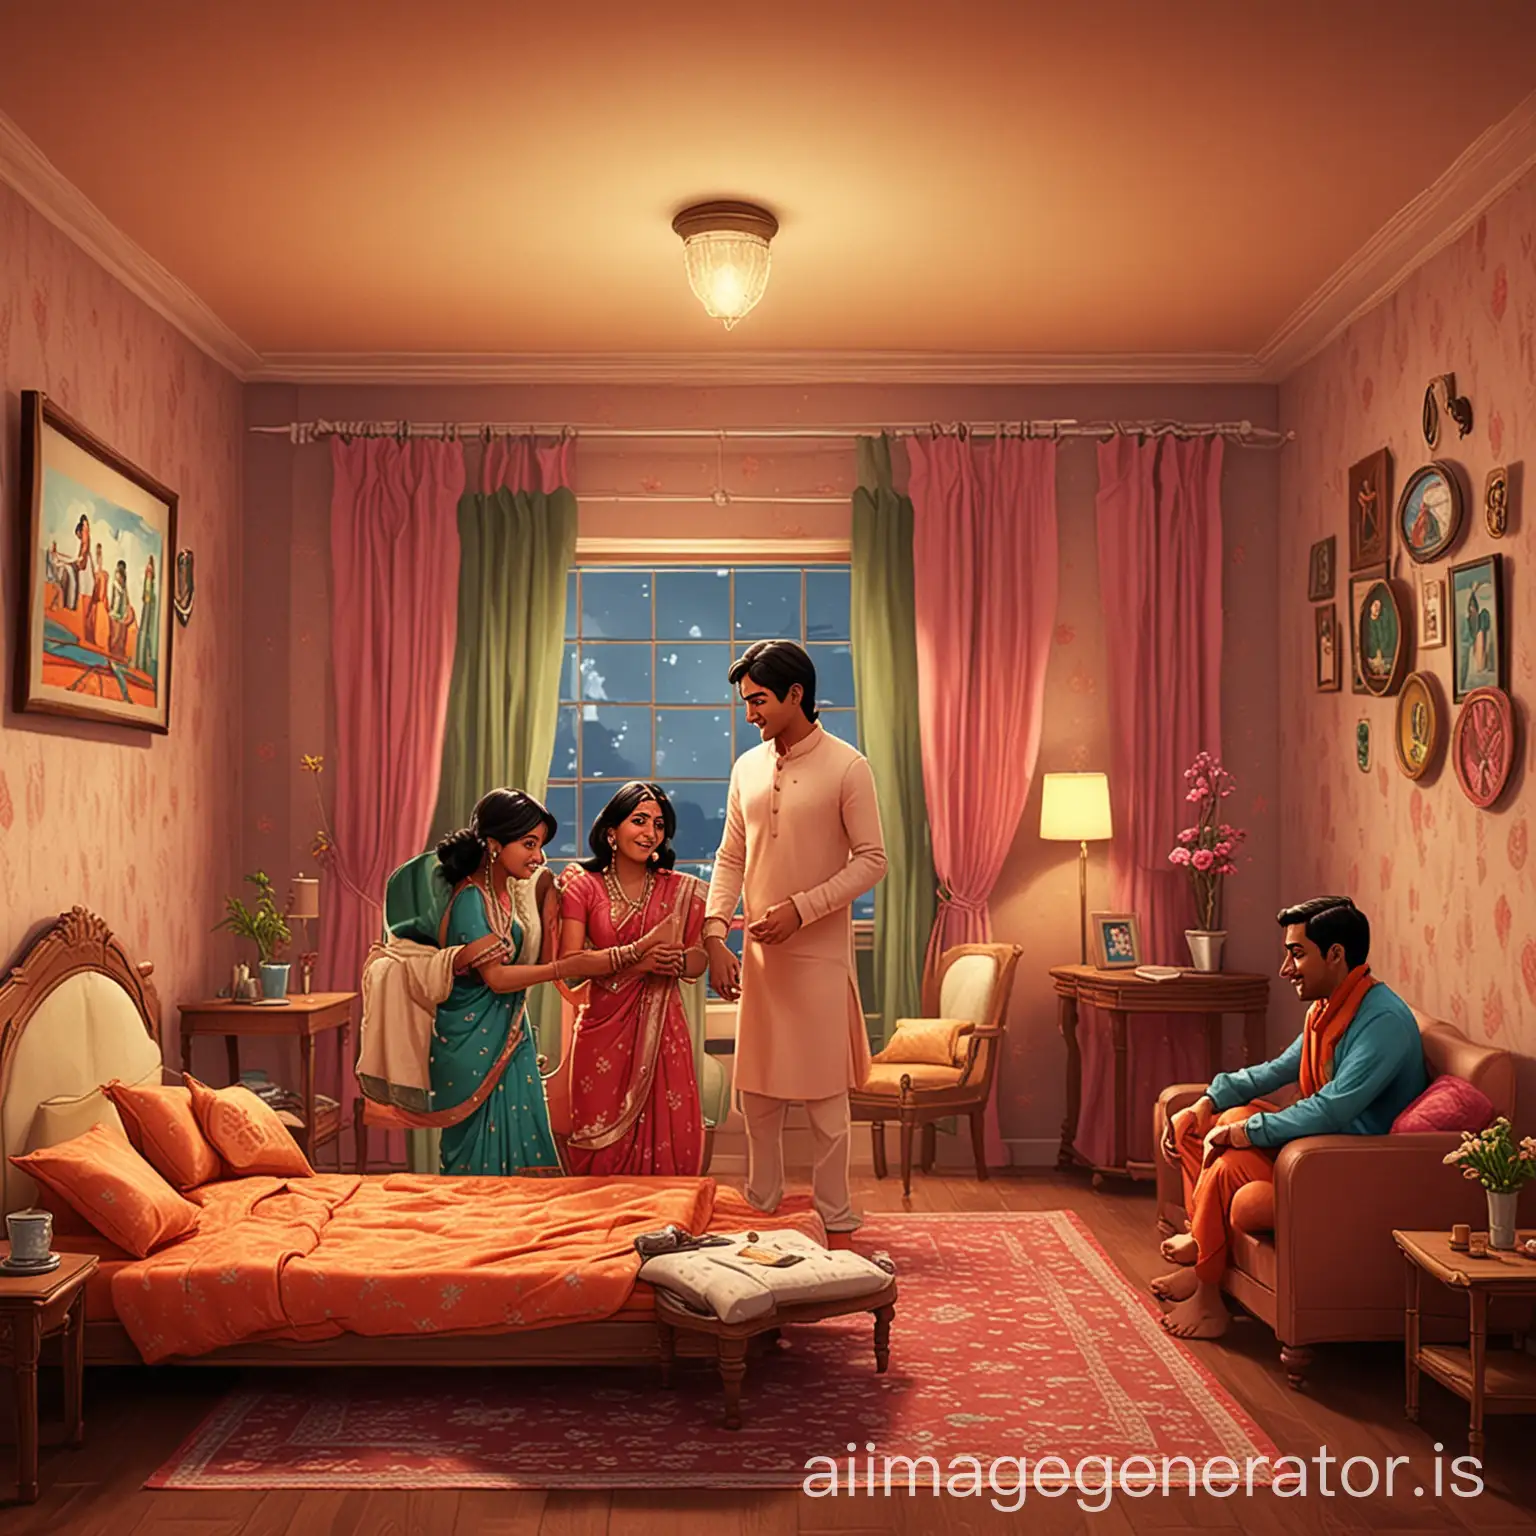  "Generate a cartoon image of a room where three Indian couples are engaged in romantic activities separately."